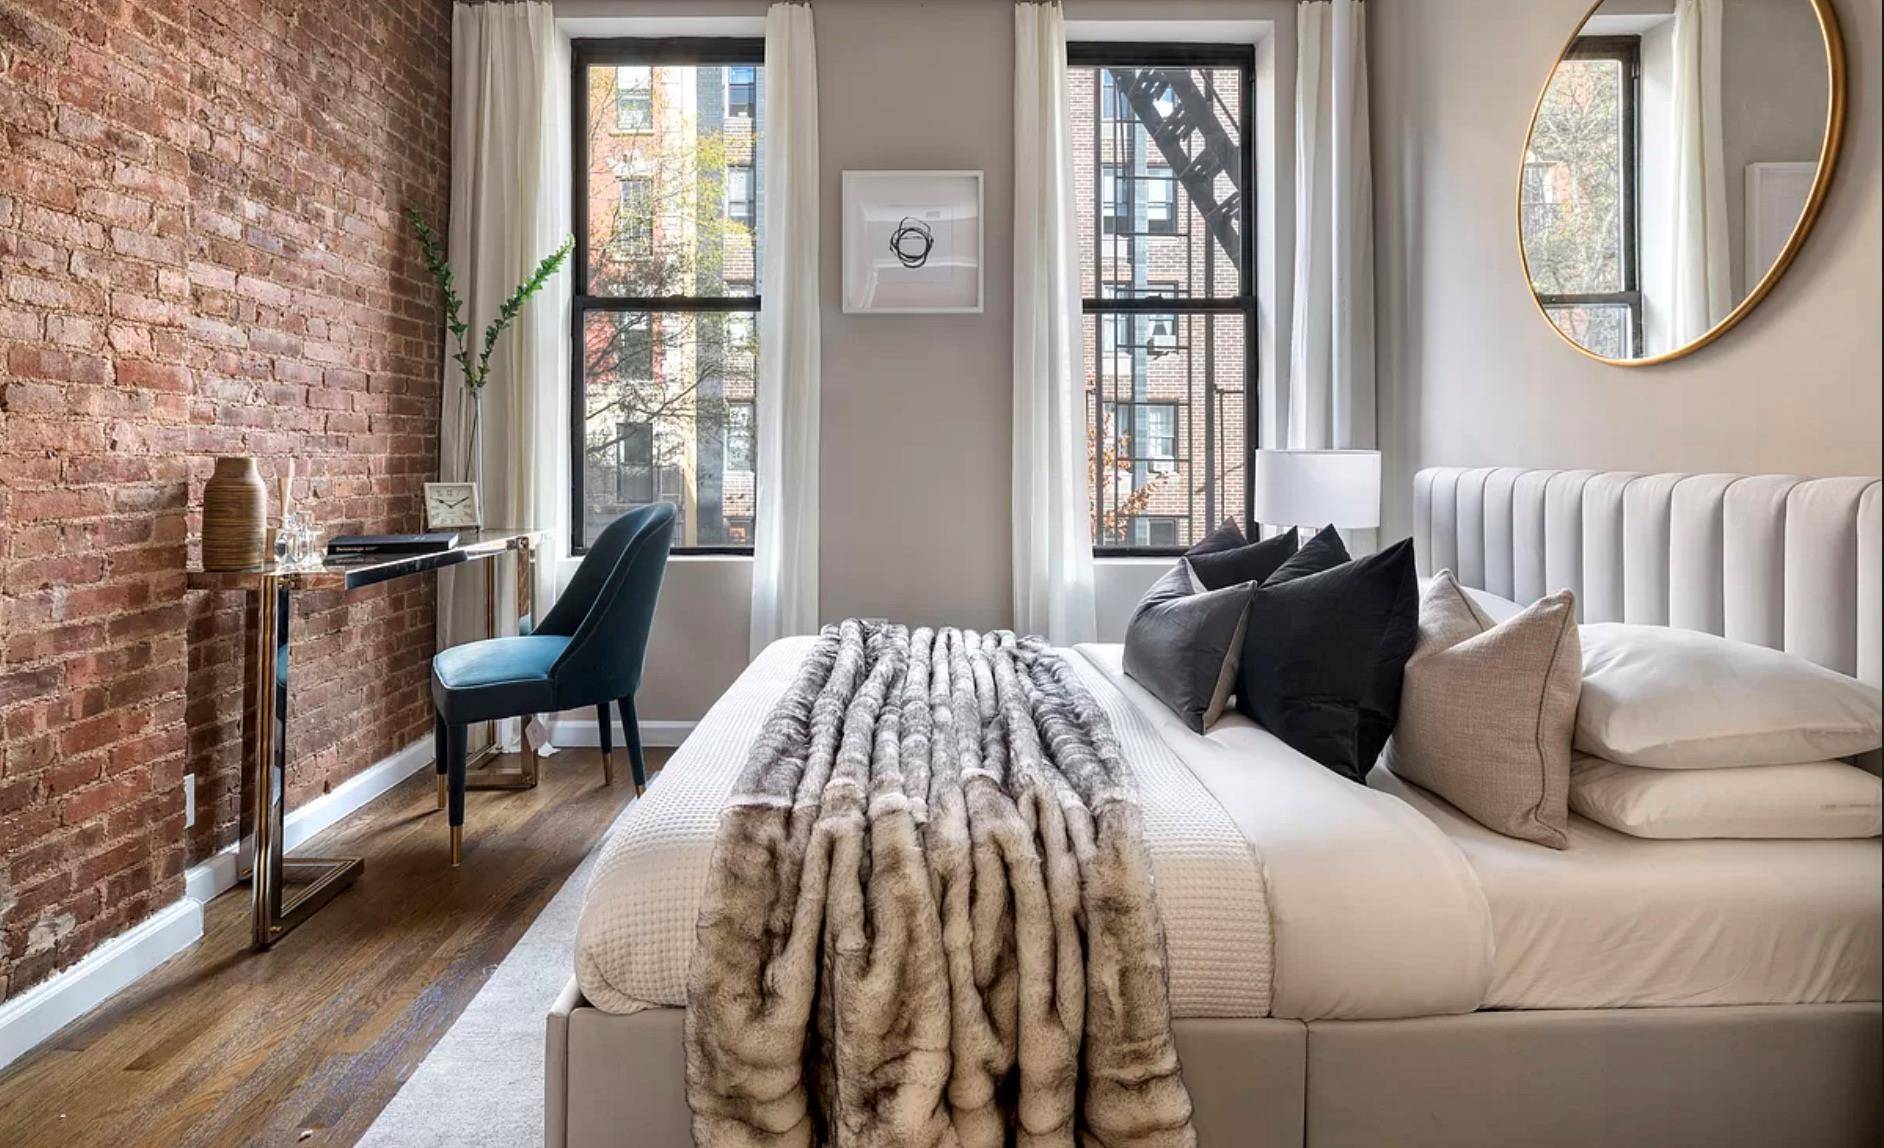 AVAILABLE JUNE 1OPEN HOUSE IS BY APPOINTMENTWASHER DRYER IN UNITLocated just one flight up in a prime Chelsea building, this beautifully gut renovated 1BR unit features plenty of charm, including ...